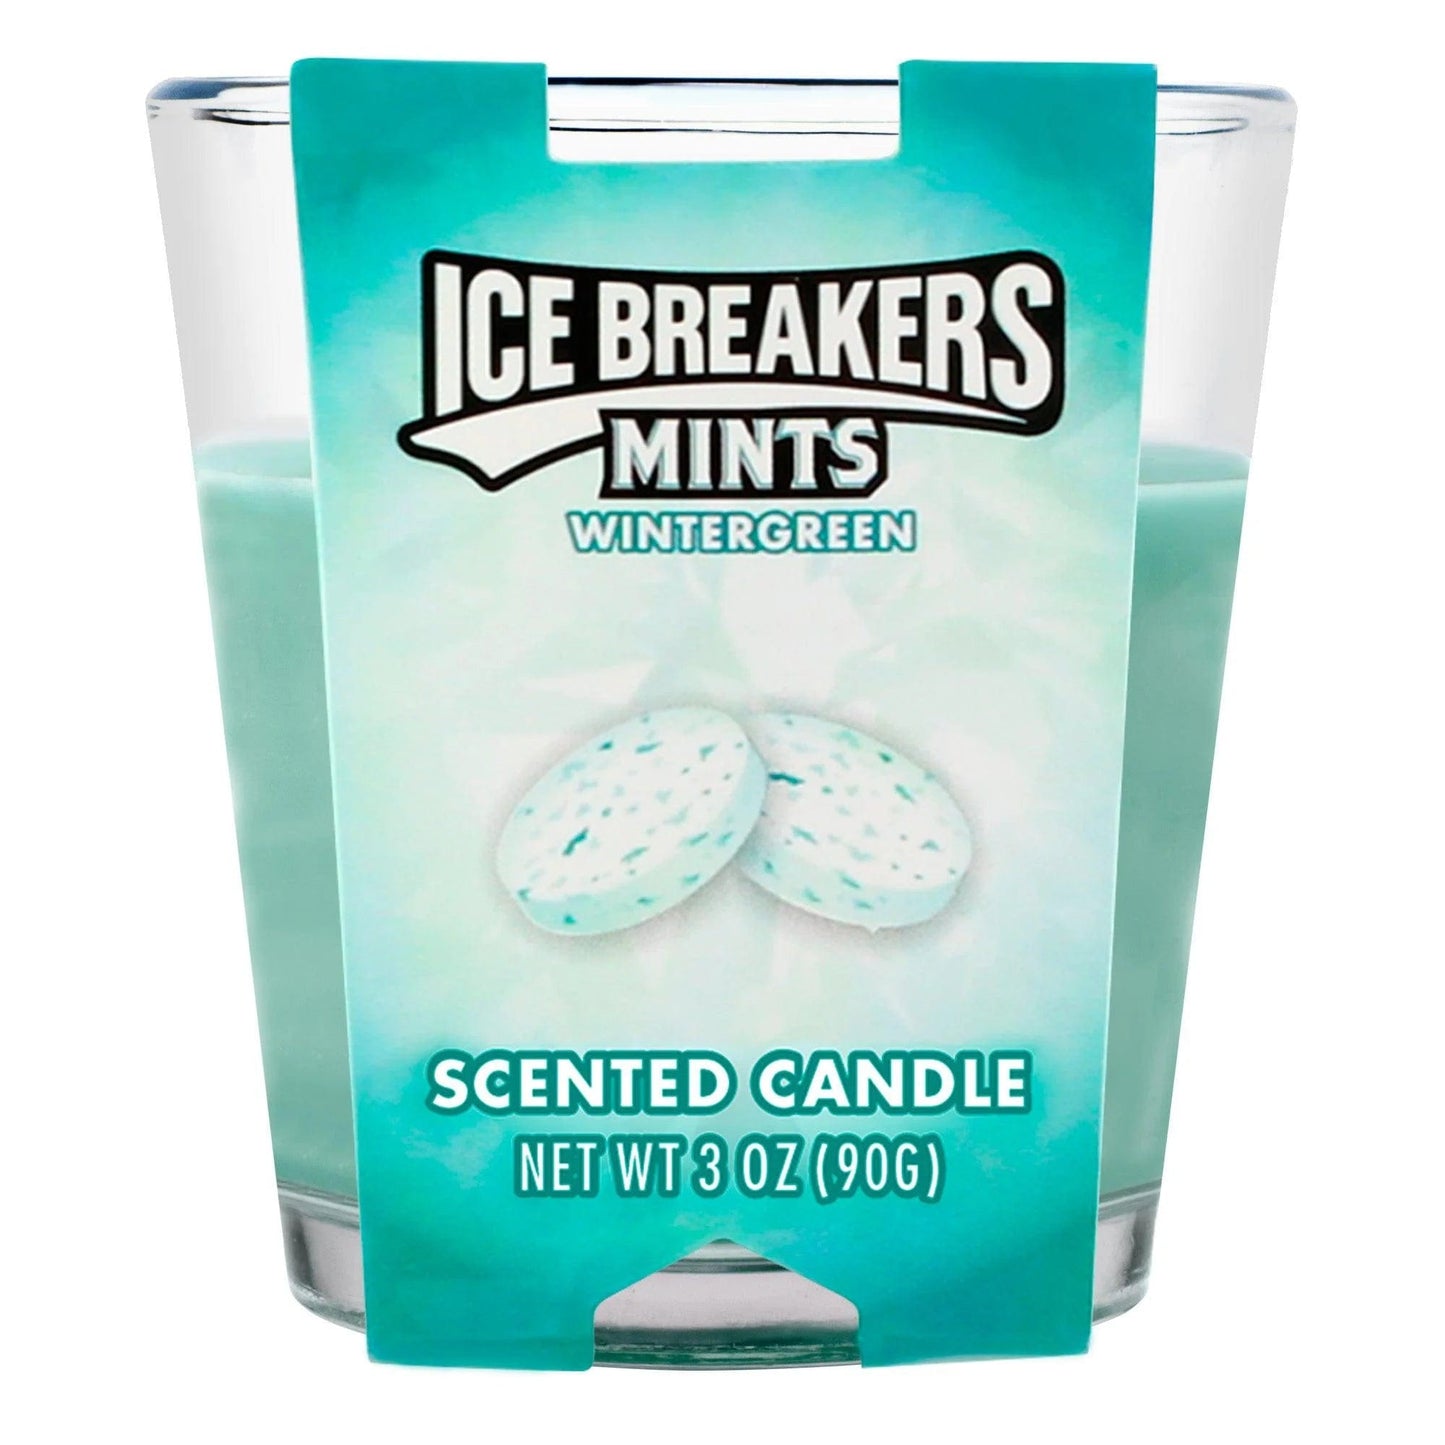 Sweet Tooth Candles Icebreakers Mints Wintergreen 3oz Candy Scented Candles